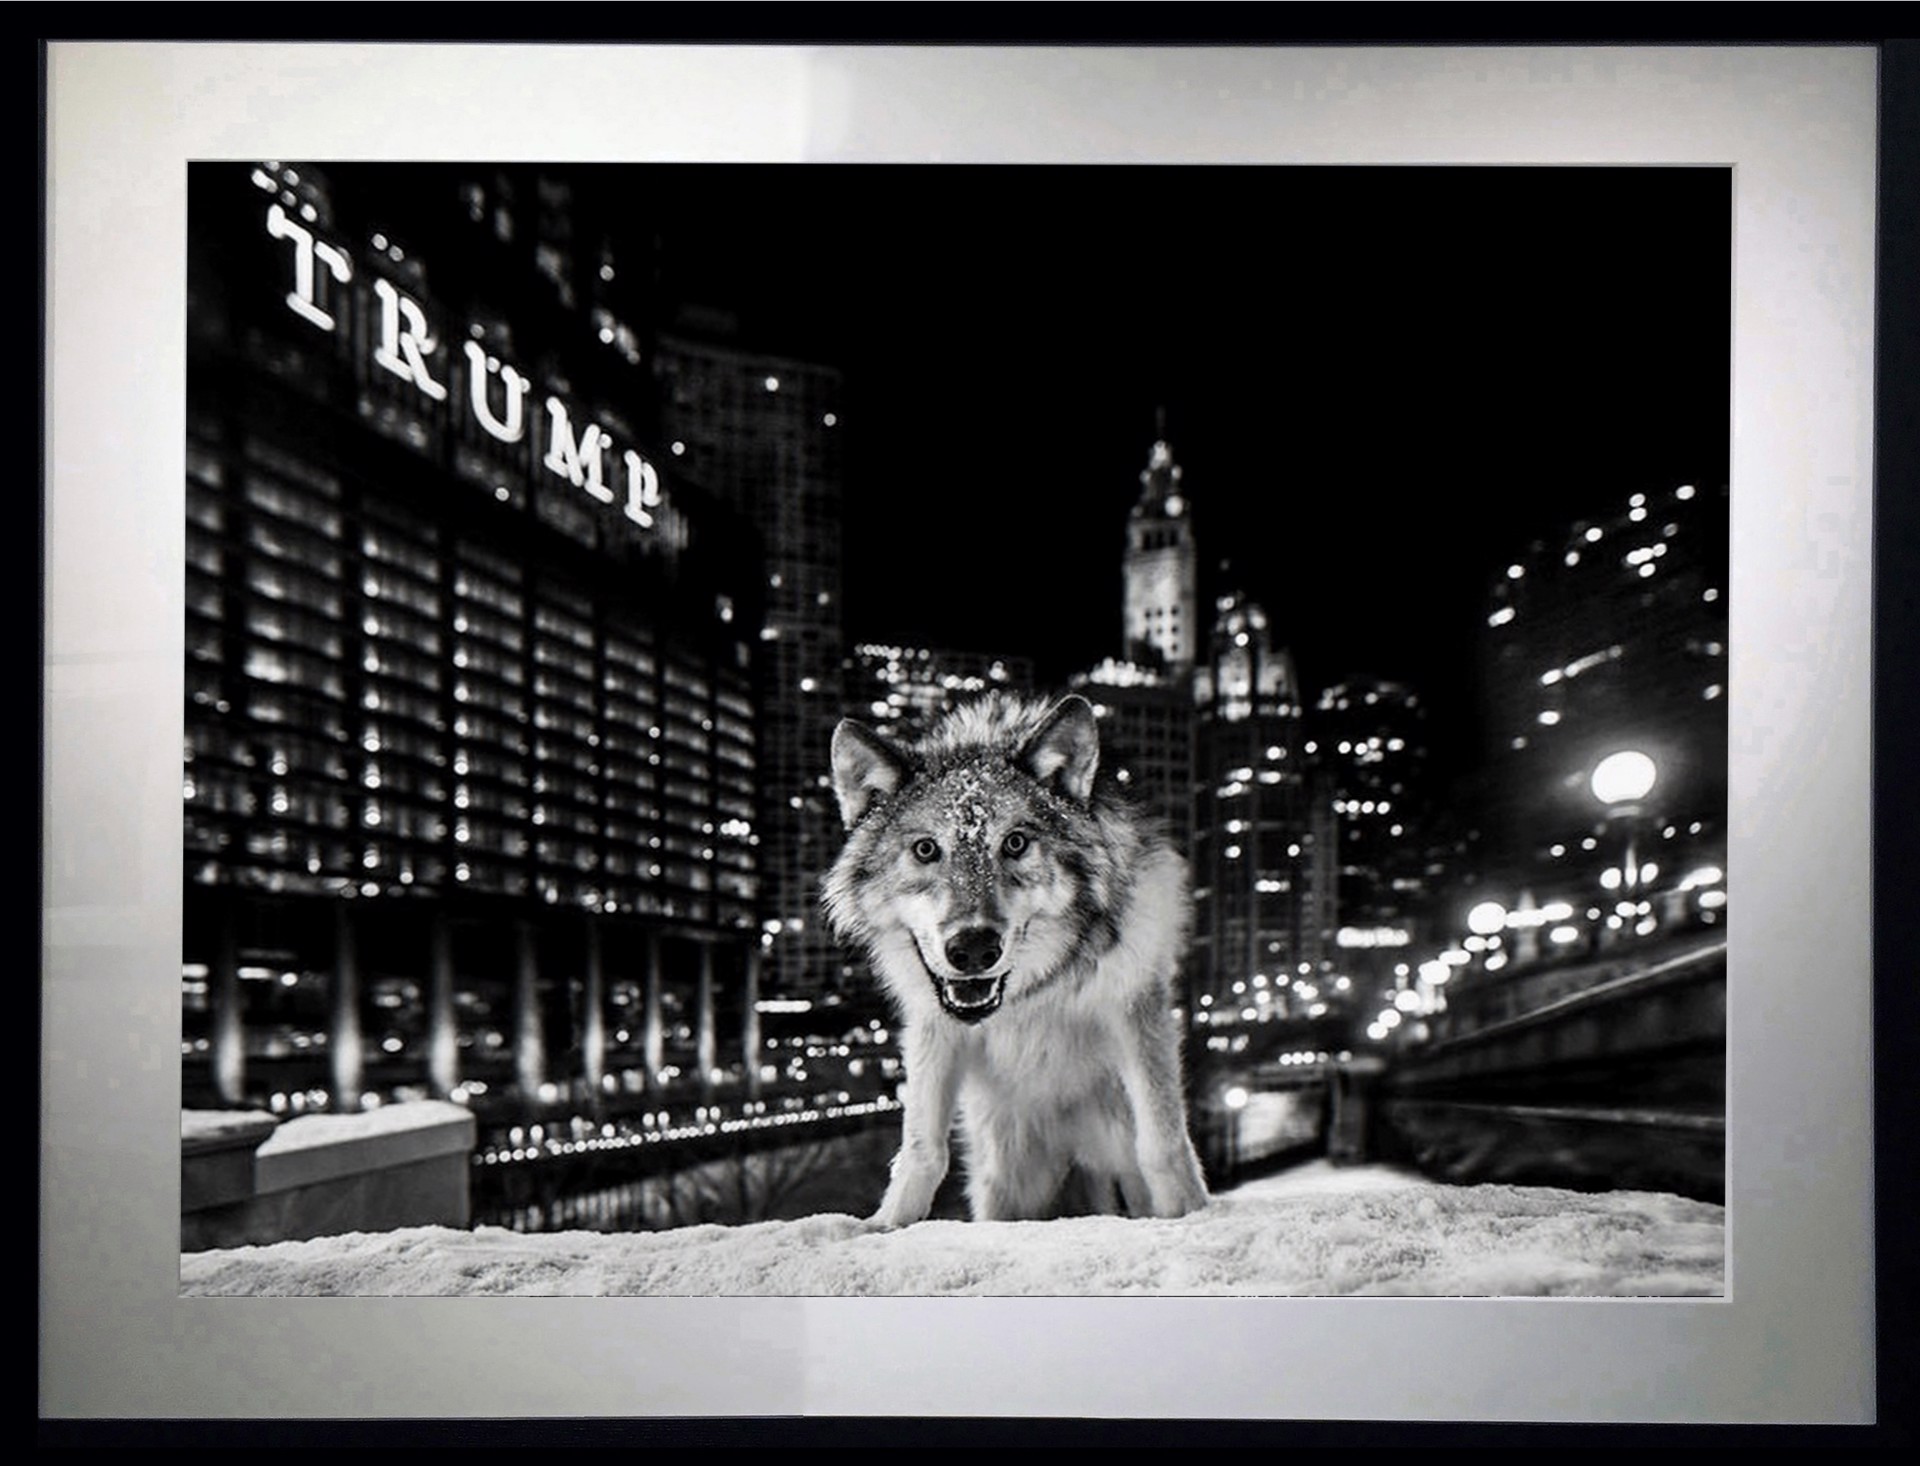 It Is Only A Matter of Time by David Yarrow